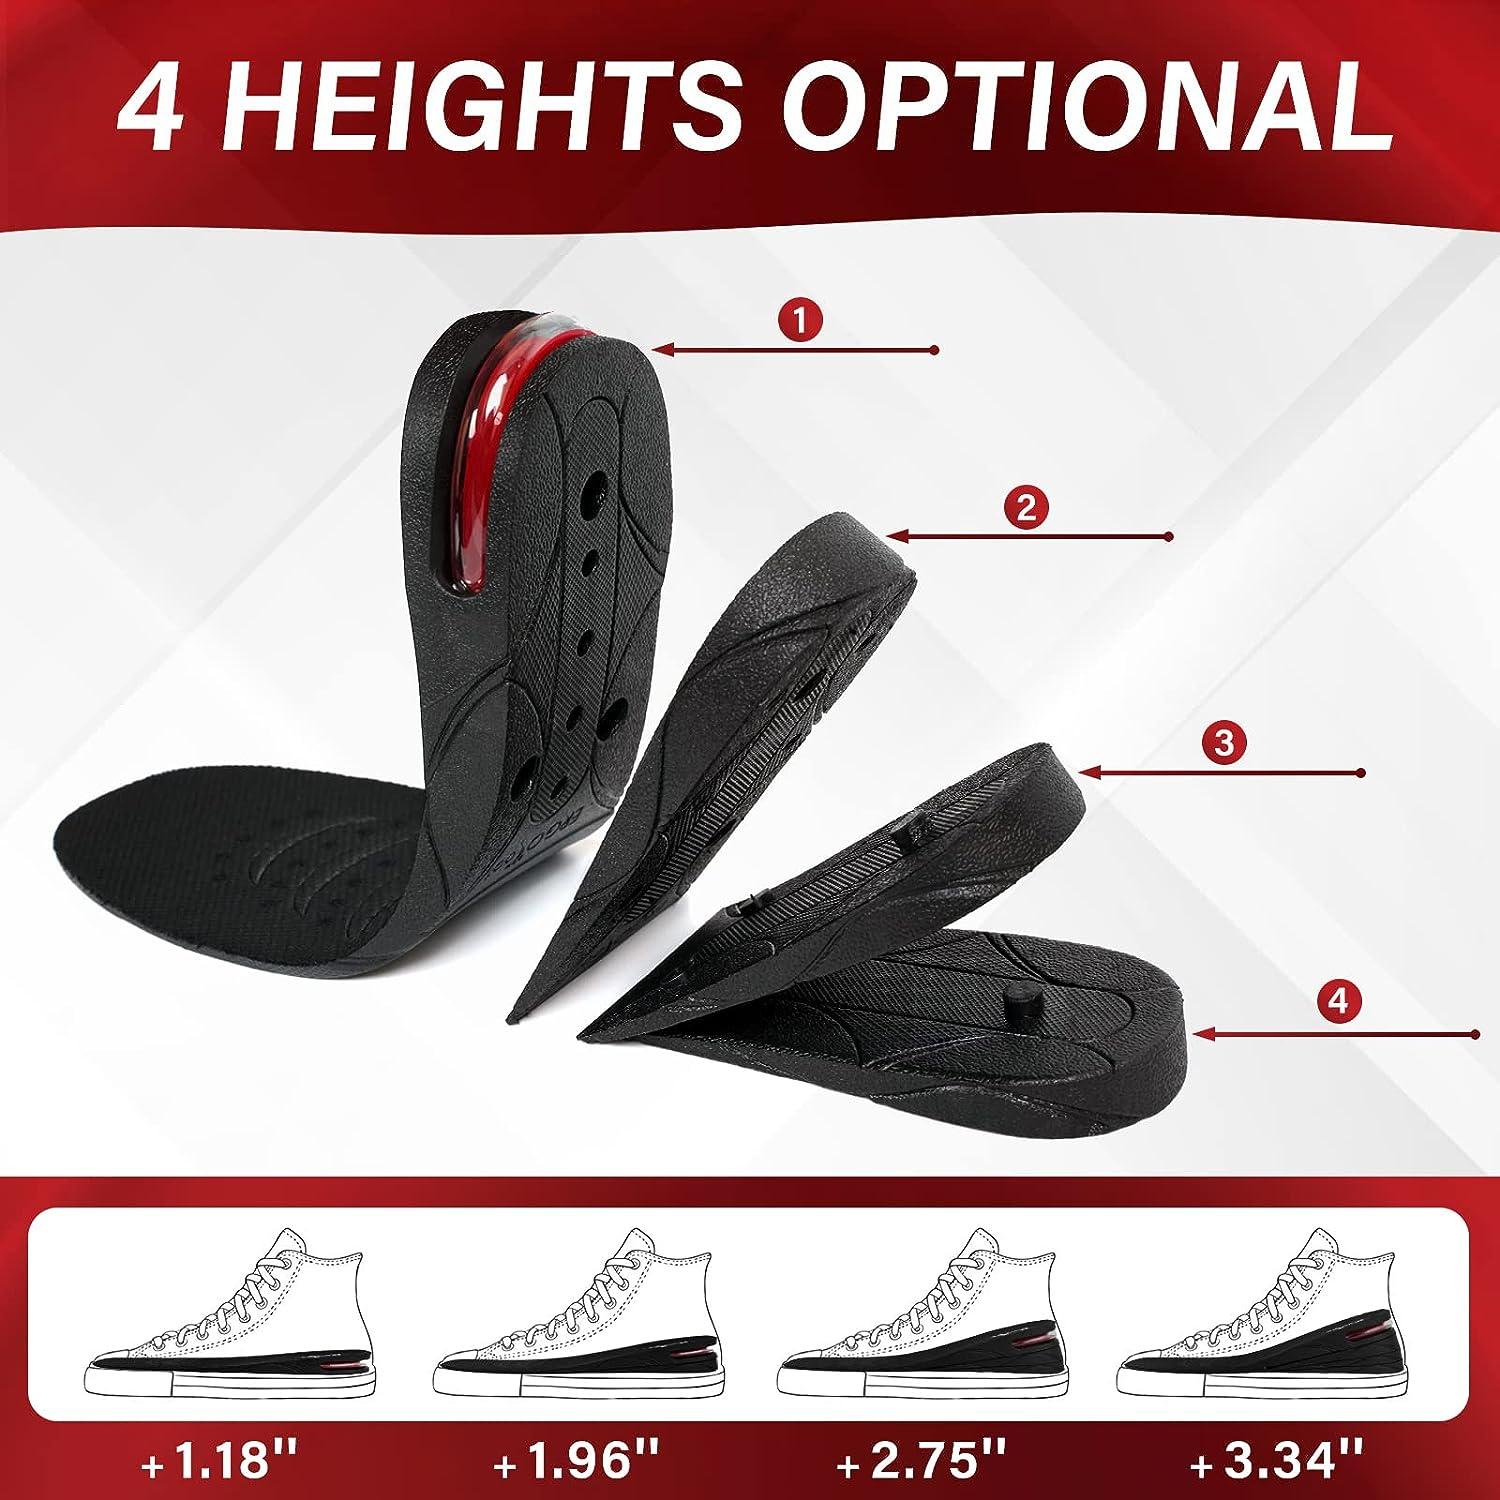 Height Increase Insole - Shoe Lifts for Men and Women (2 Inch) Elevated -  Cushioned Heel Inserts and Arch Support Insoles - Lifted Supportive Comfort  and Breathable - by TruHeight